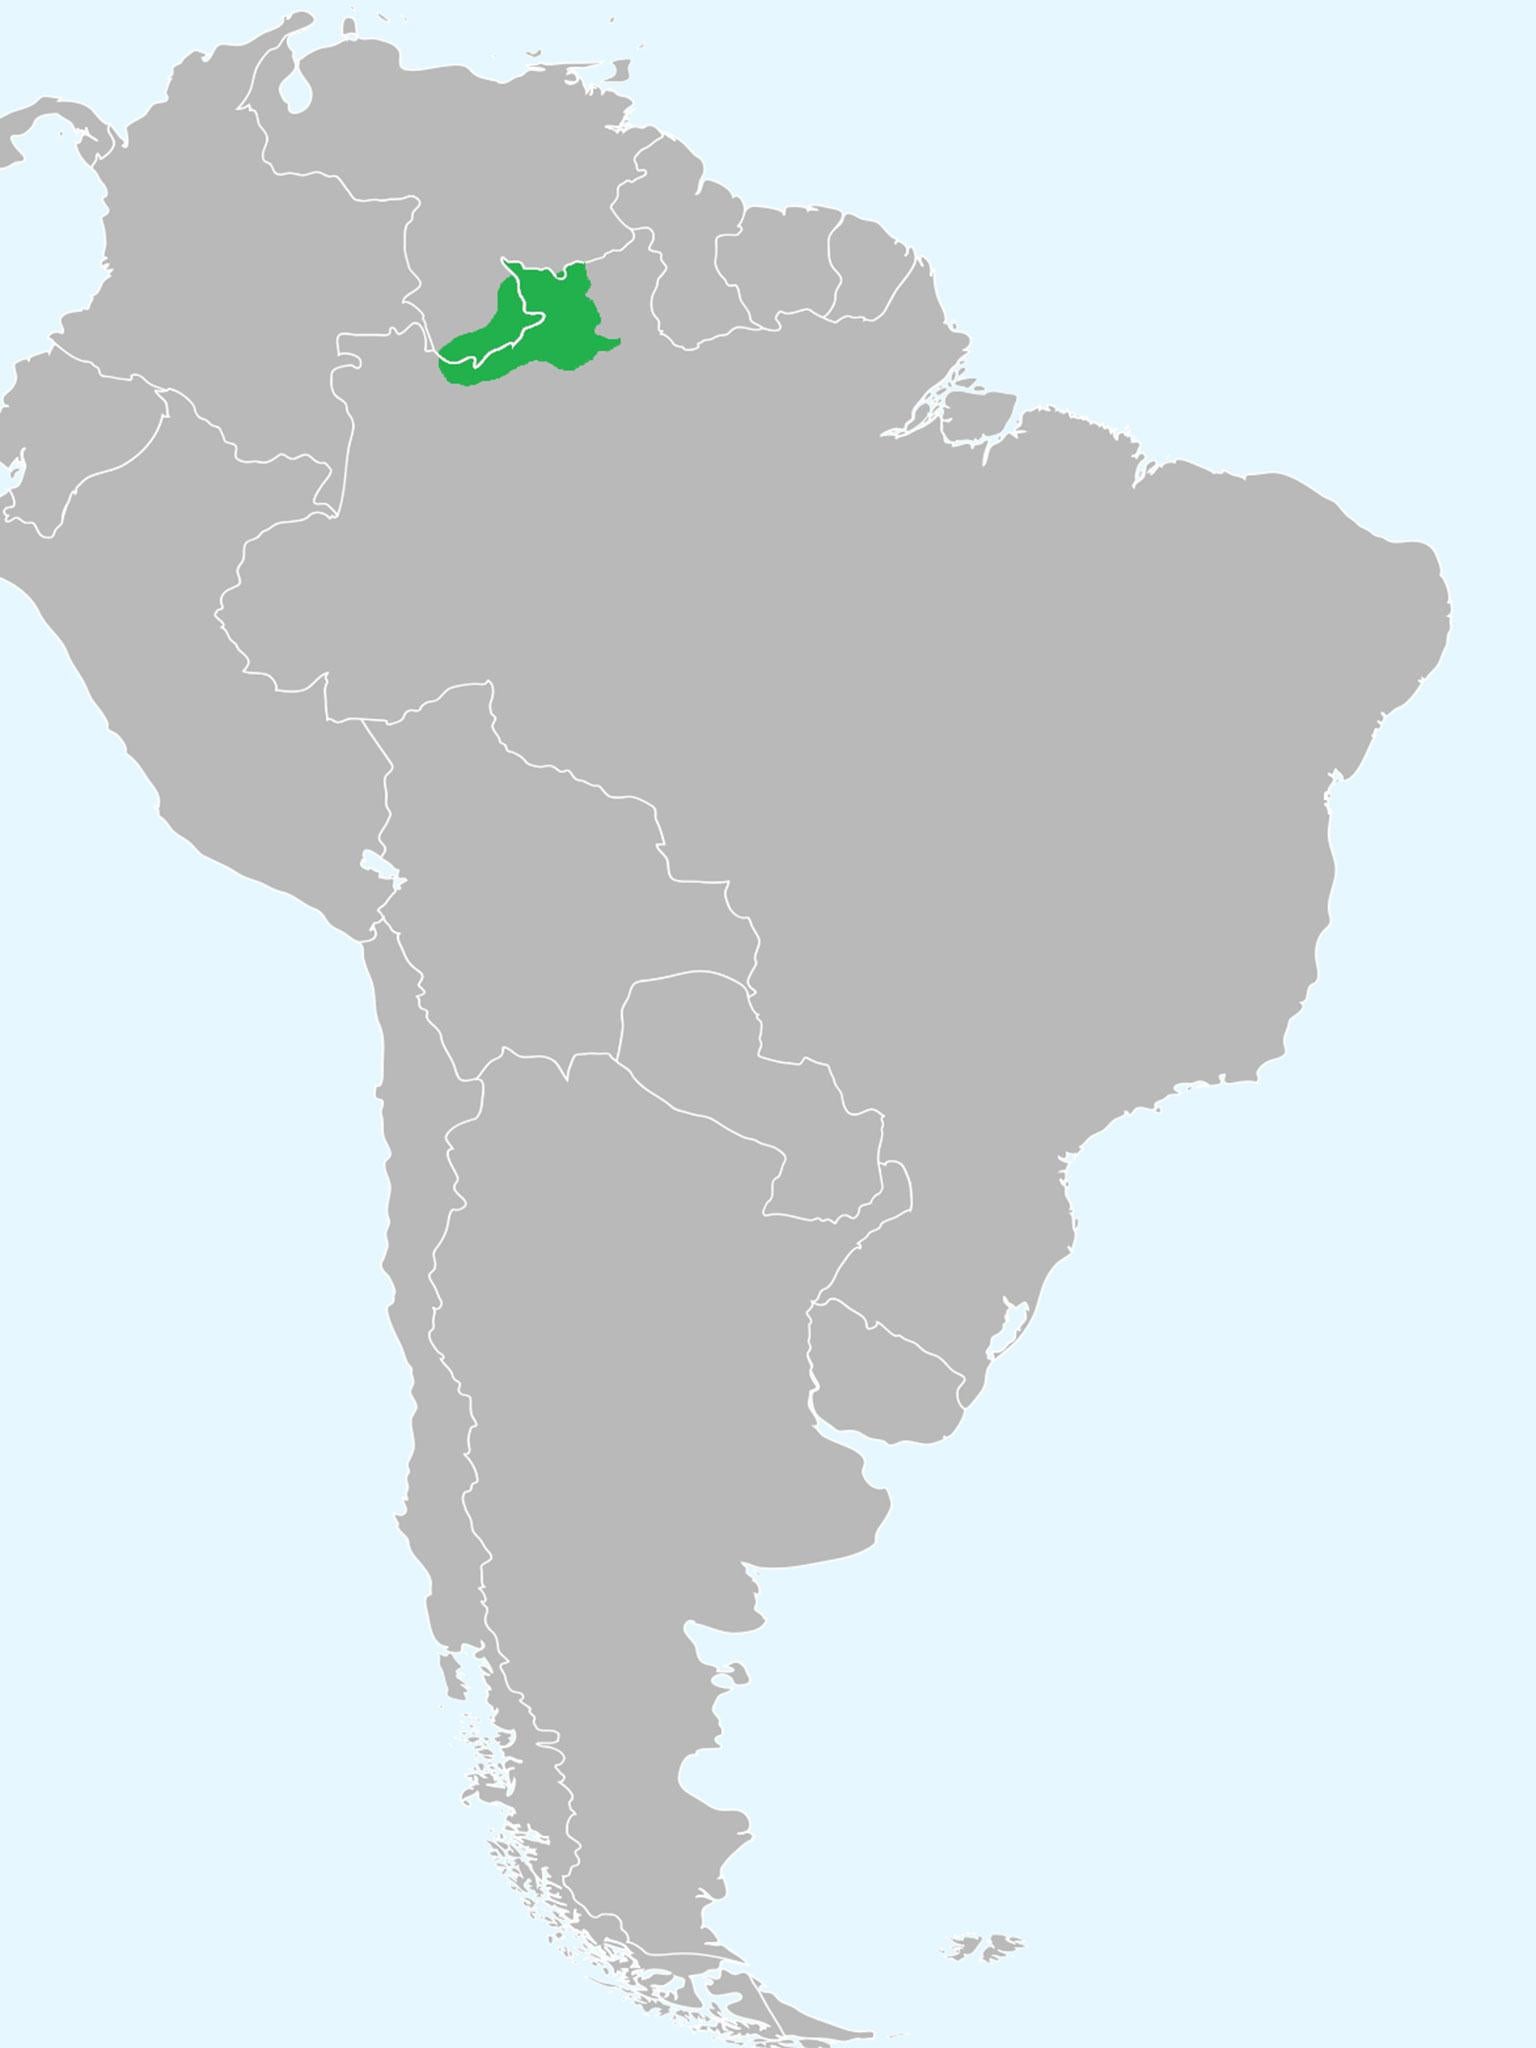 A map showing indigenous Yanomami territory in northern Brazil and southern Venezuela